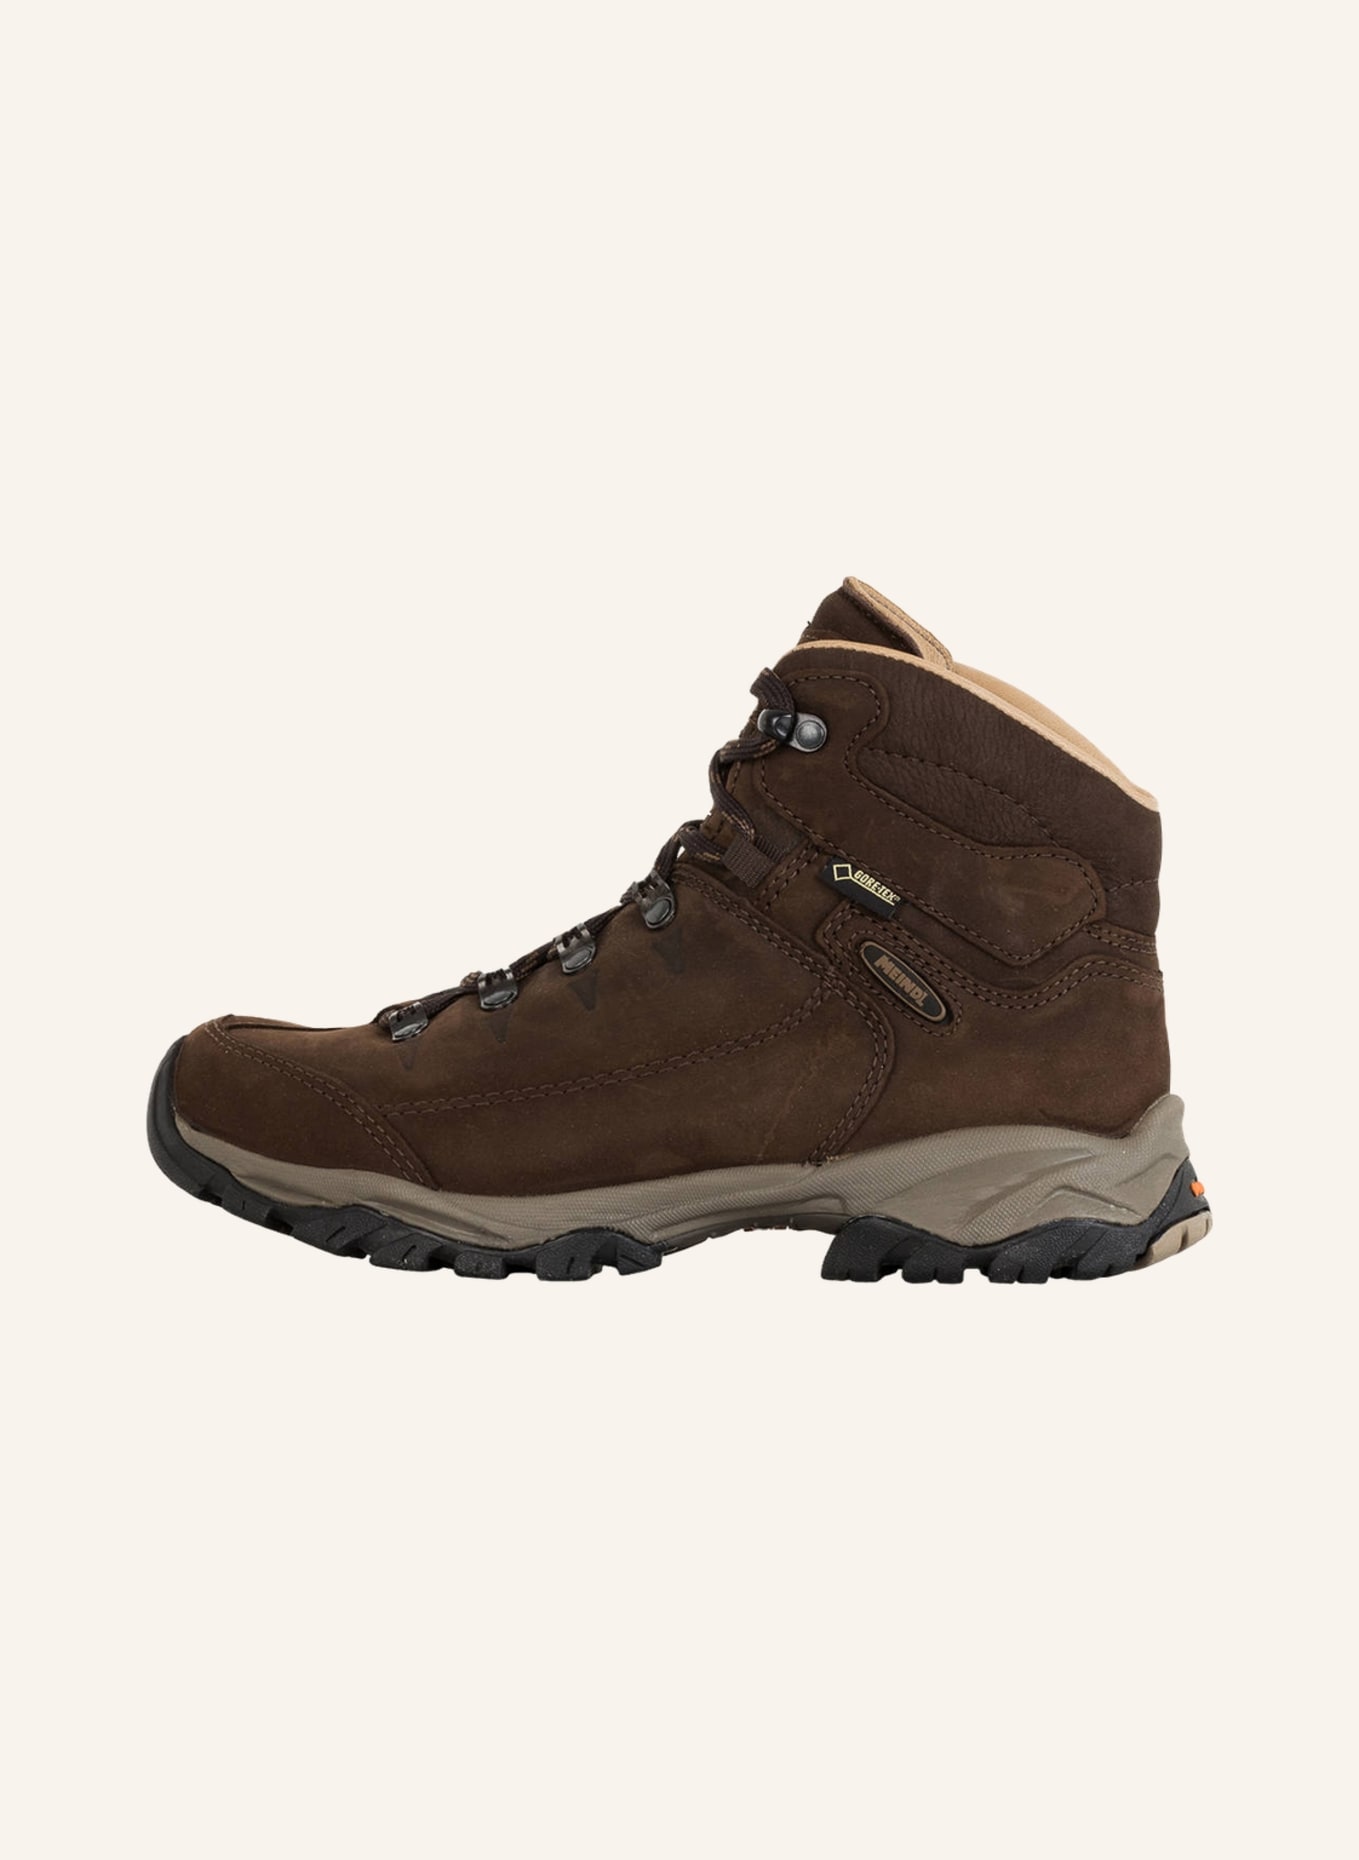 MEINDL Outdoor shoes OHIO LADY 2 GTX, Color: BROWN (Image 4)